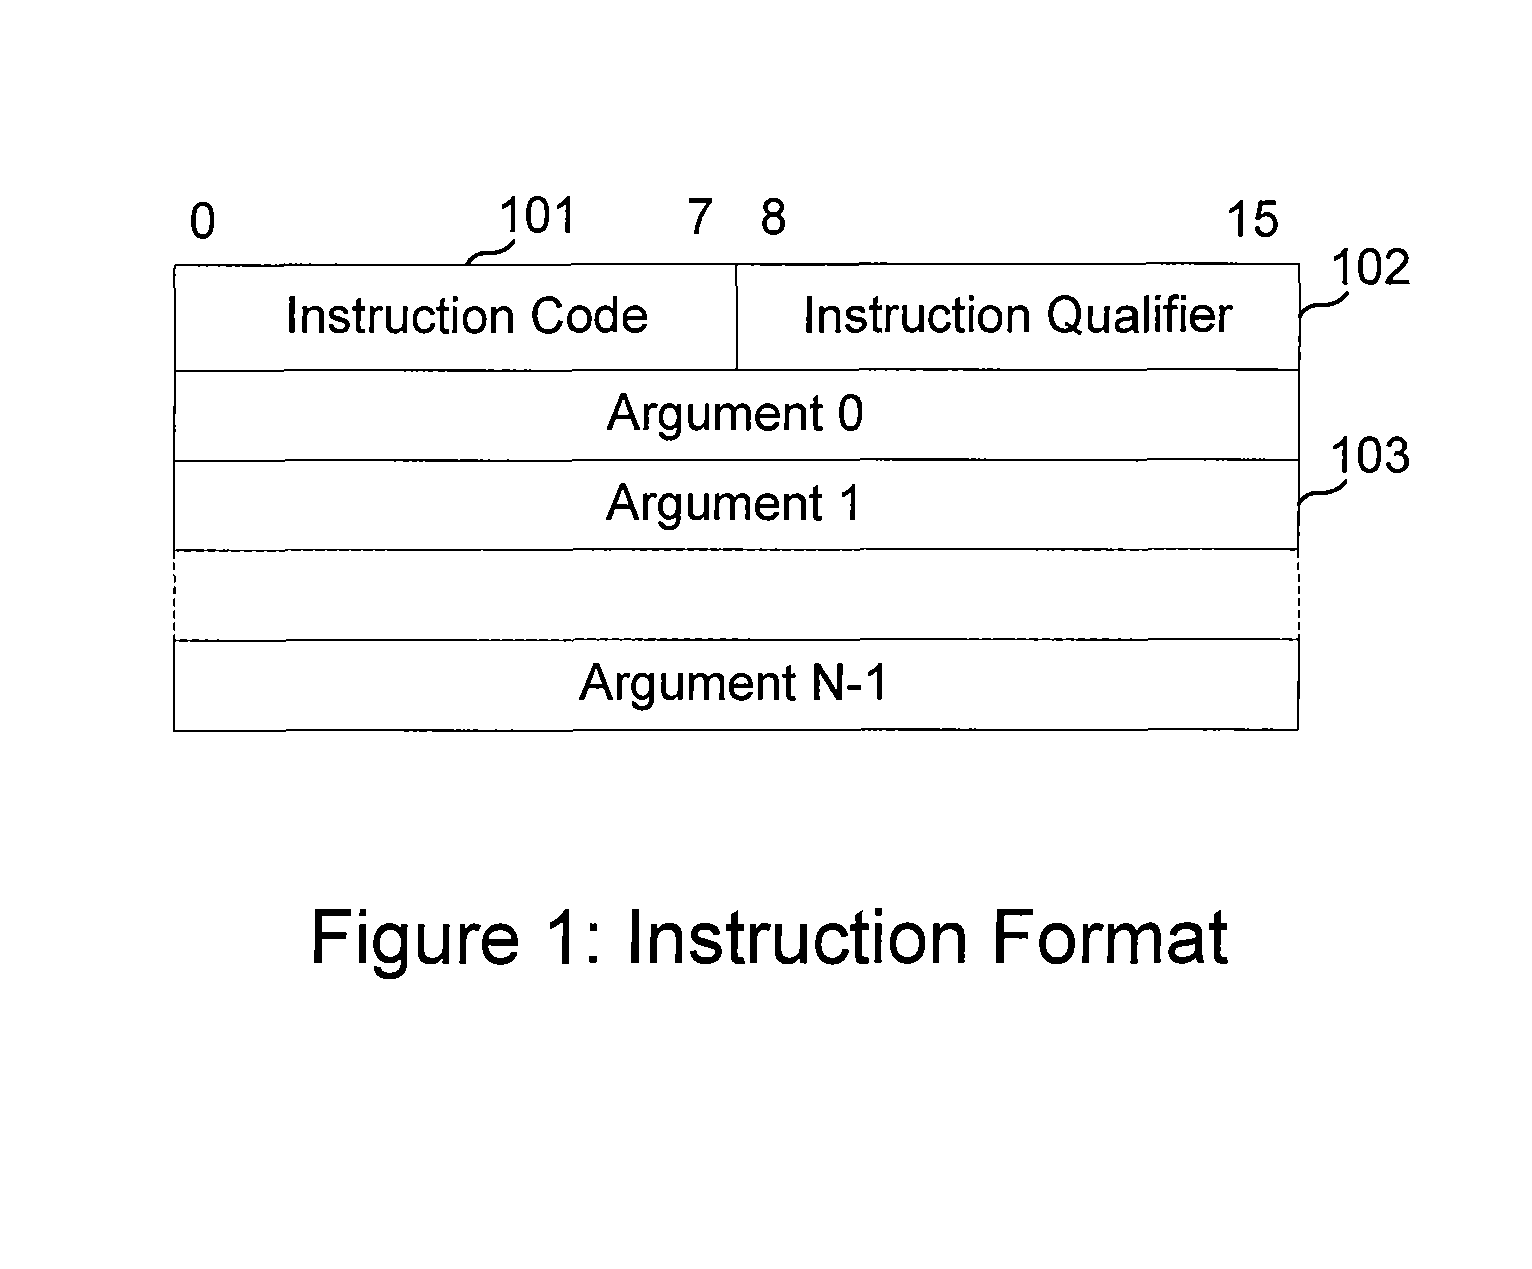 Efficient encoding and decoding methods for representing schedules and processing forward error correction codes